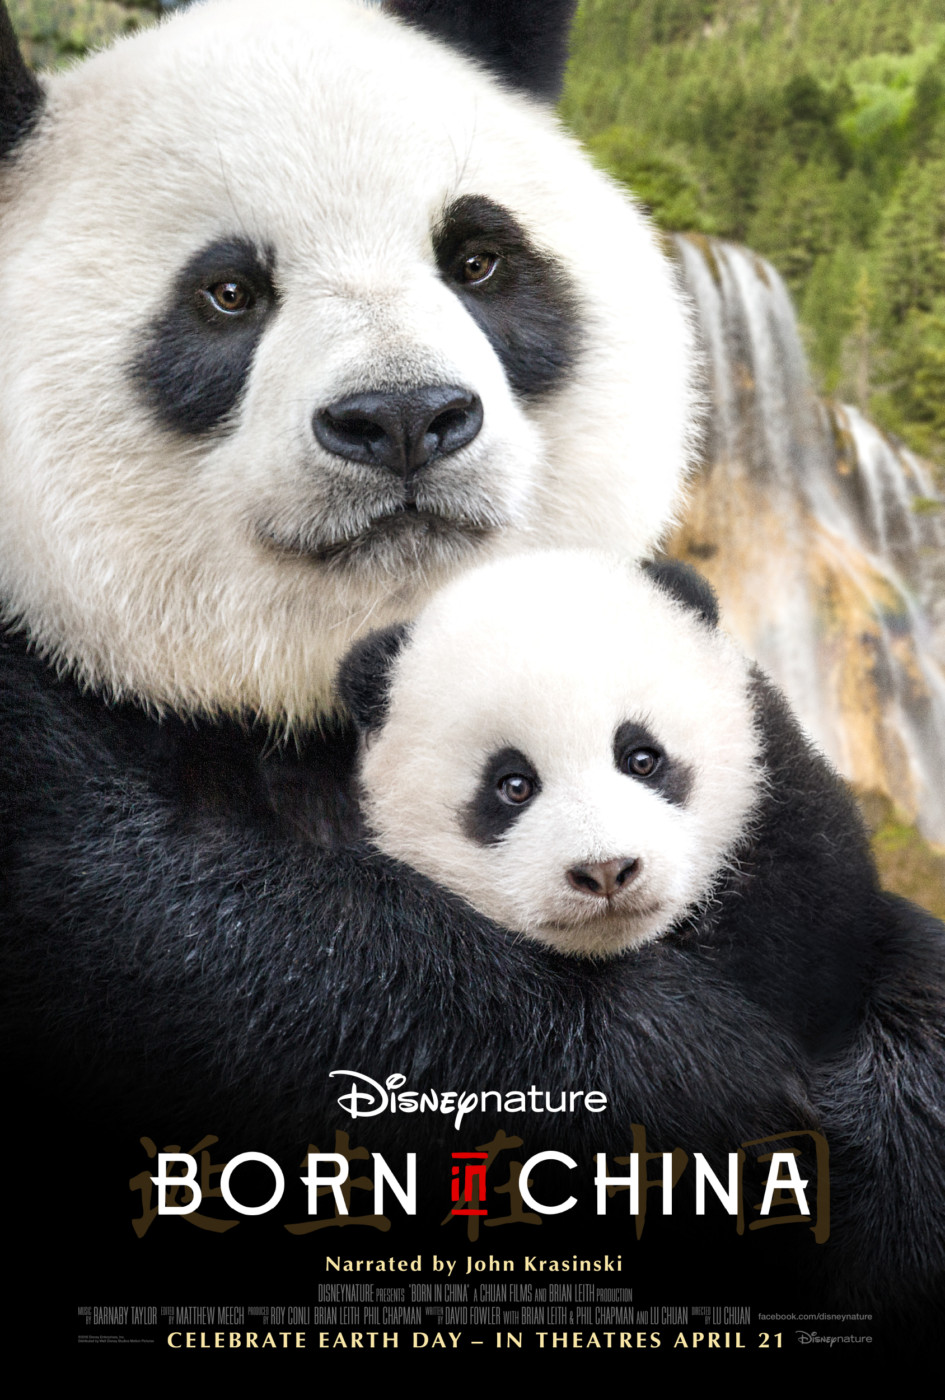 Watch Disneynature Born in China Opening on Earth Day & Make a Difference! #DisneySMMC